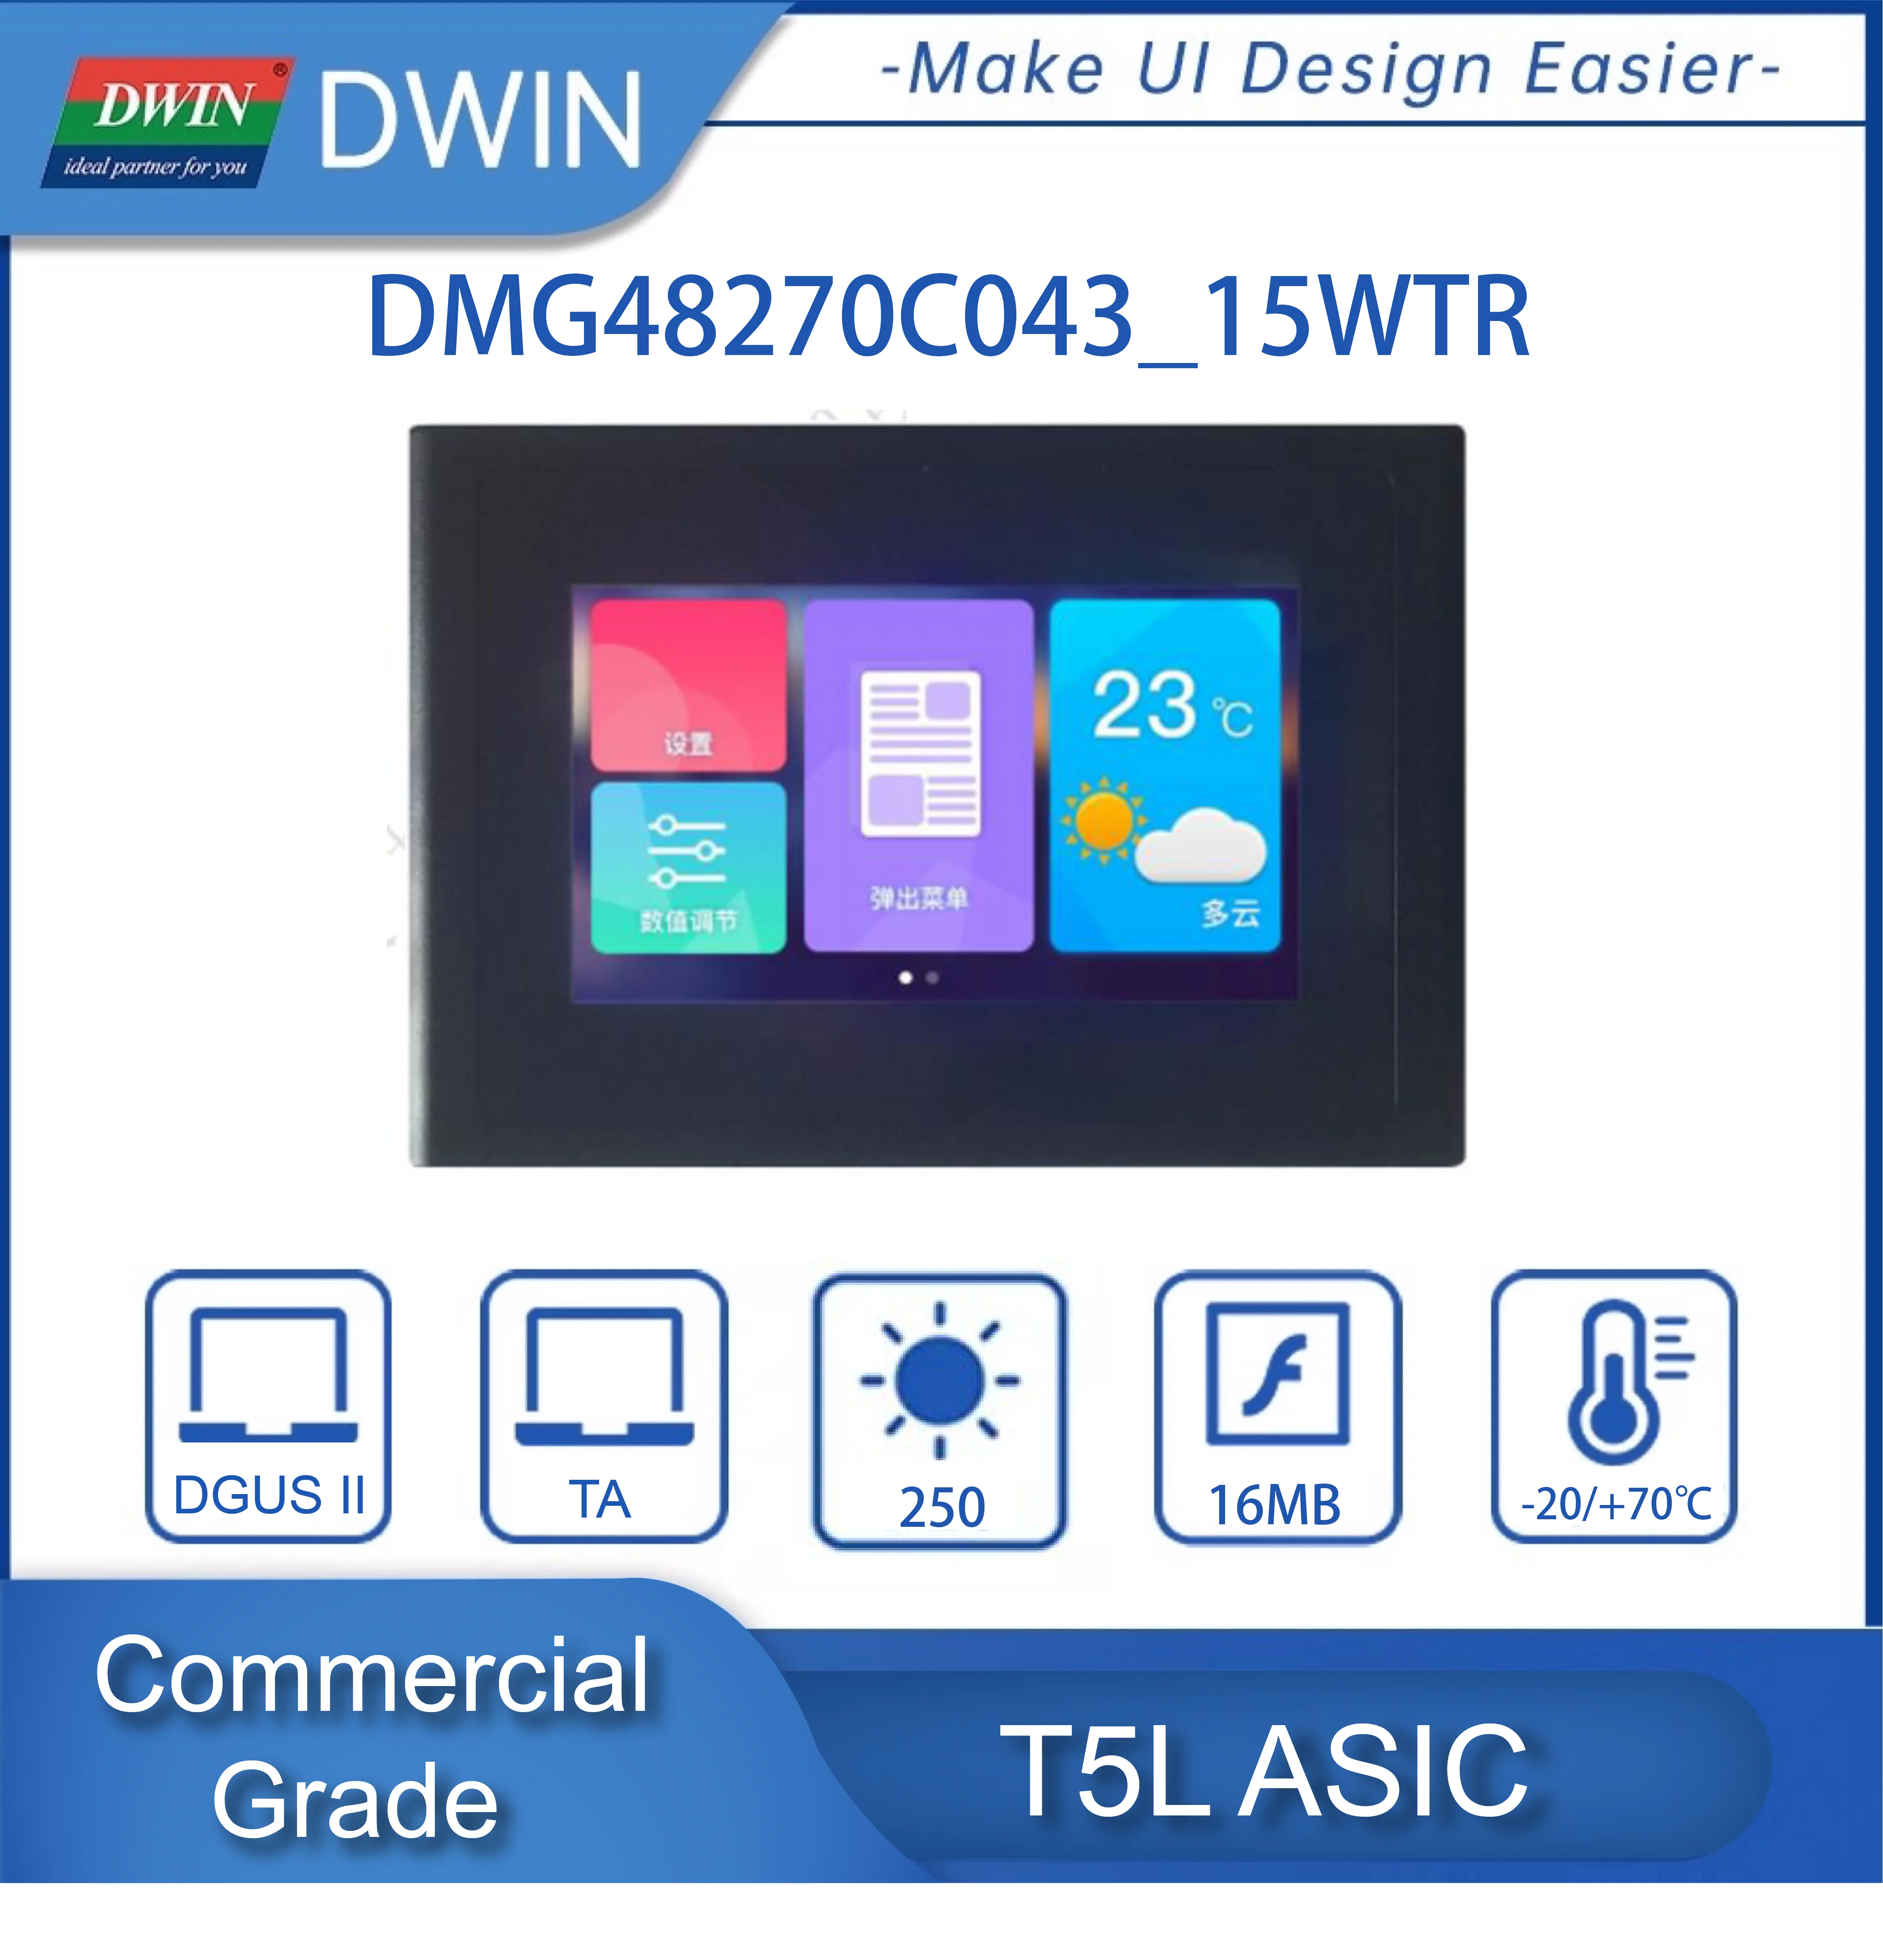 DWIN 4.3 Inch 480*272 Resolution 262K Colors TV-TN-TFT-LCD Resistive Touch Screen With Shell HMI UART Port DMG48270C043_15WTR